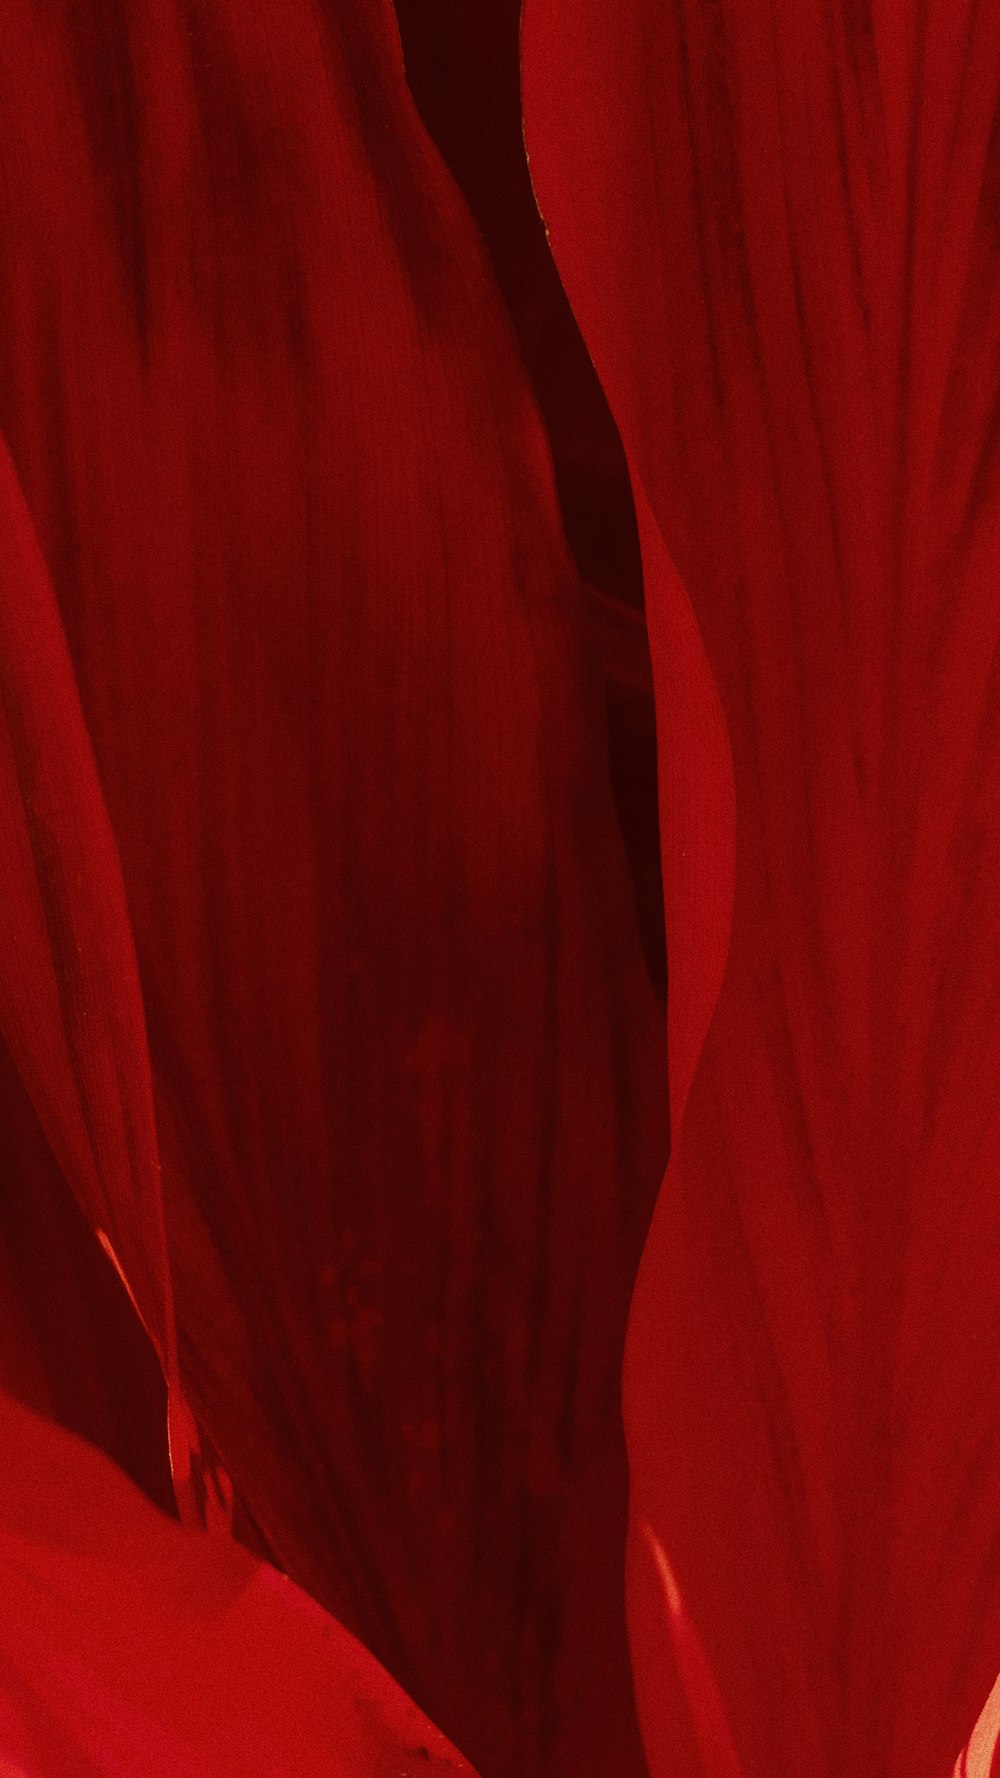 Red Wallpapers Free Hd Download 500 Hq Unsplash